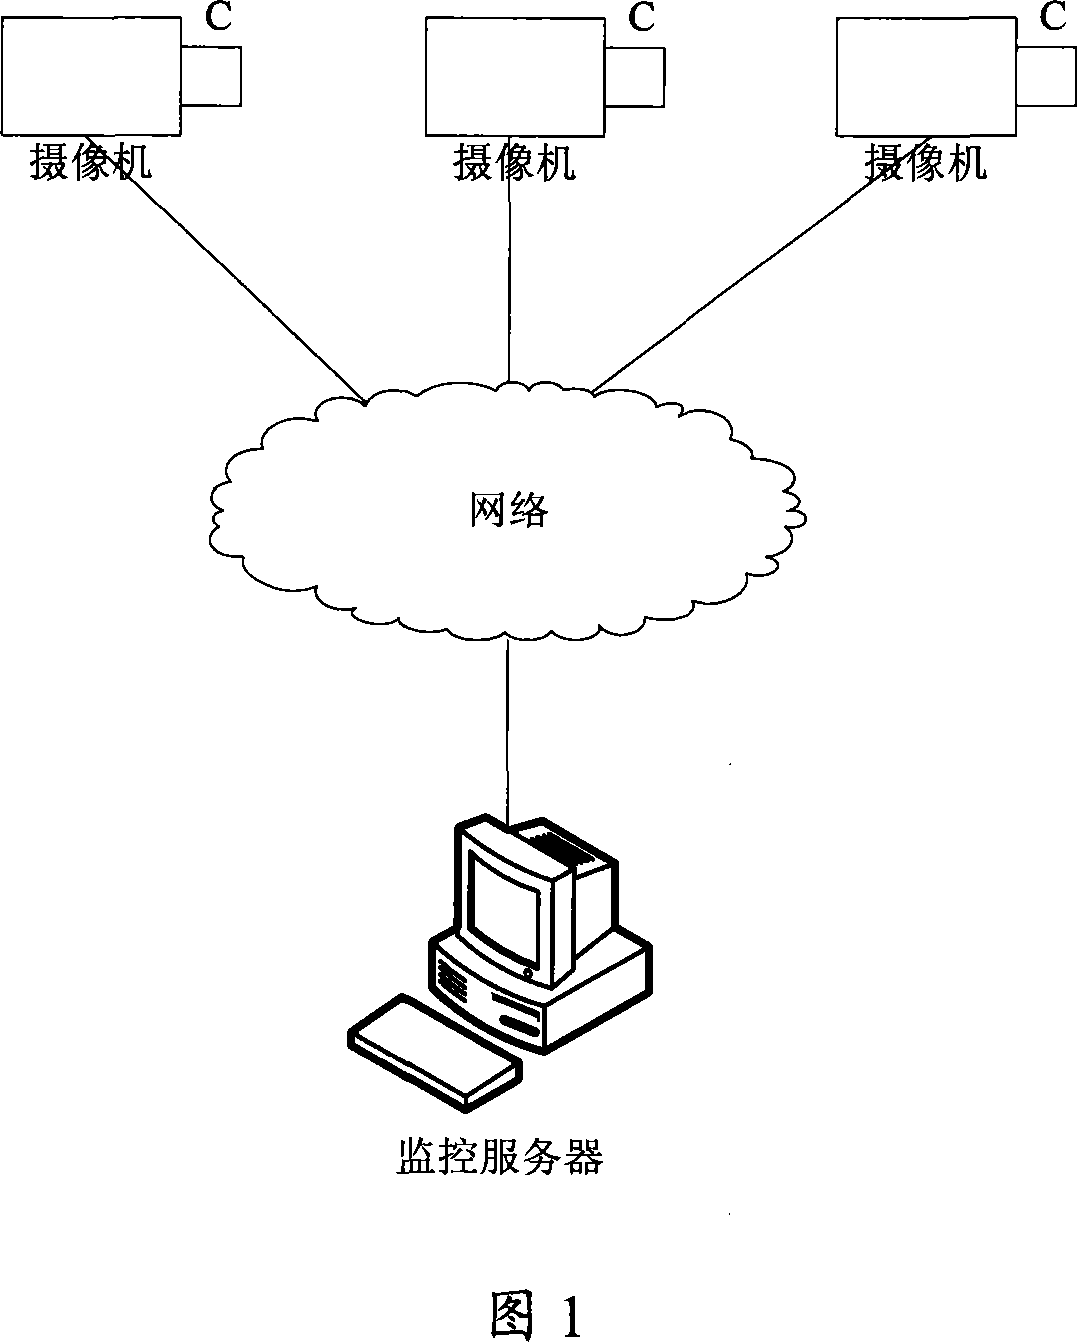 Camera locating method and locating device of video monitoring system